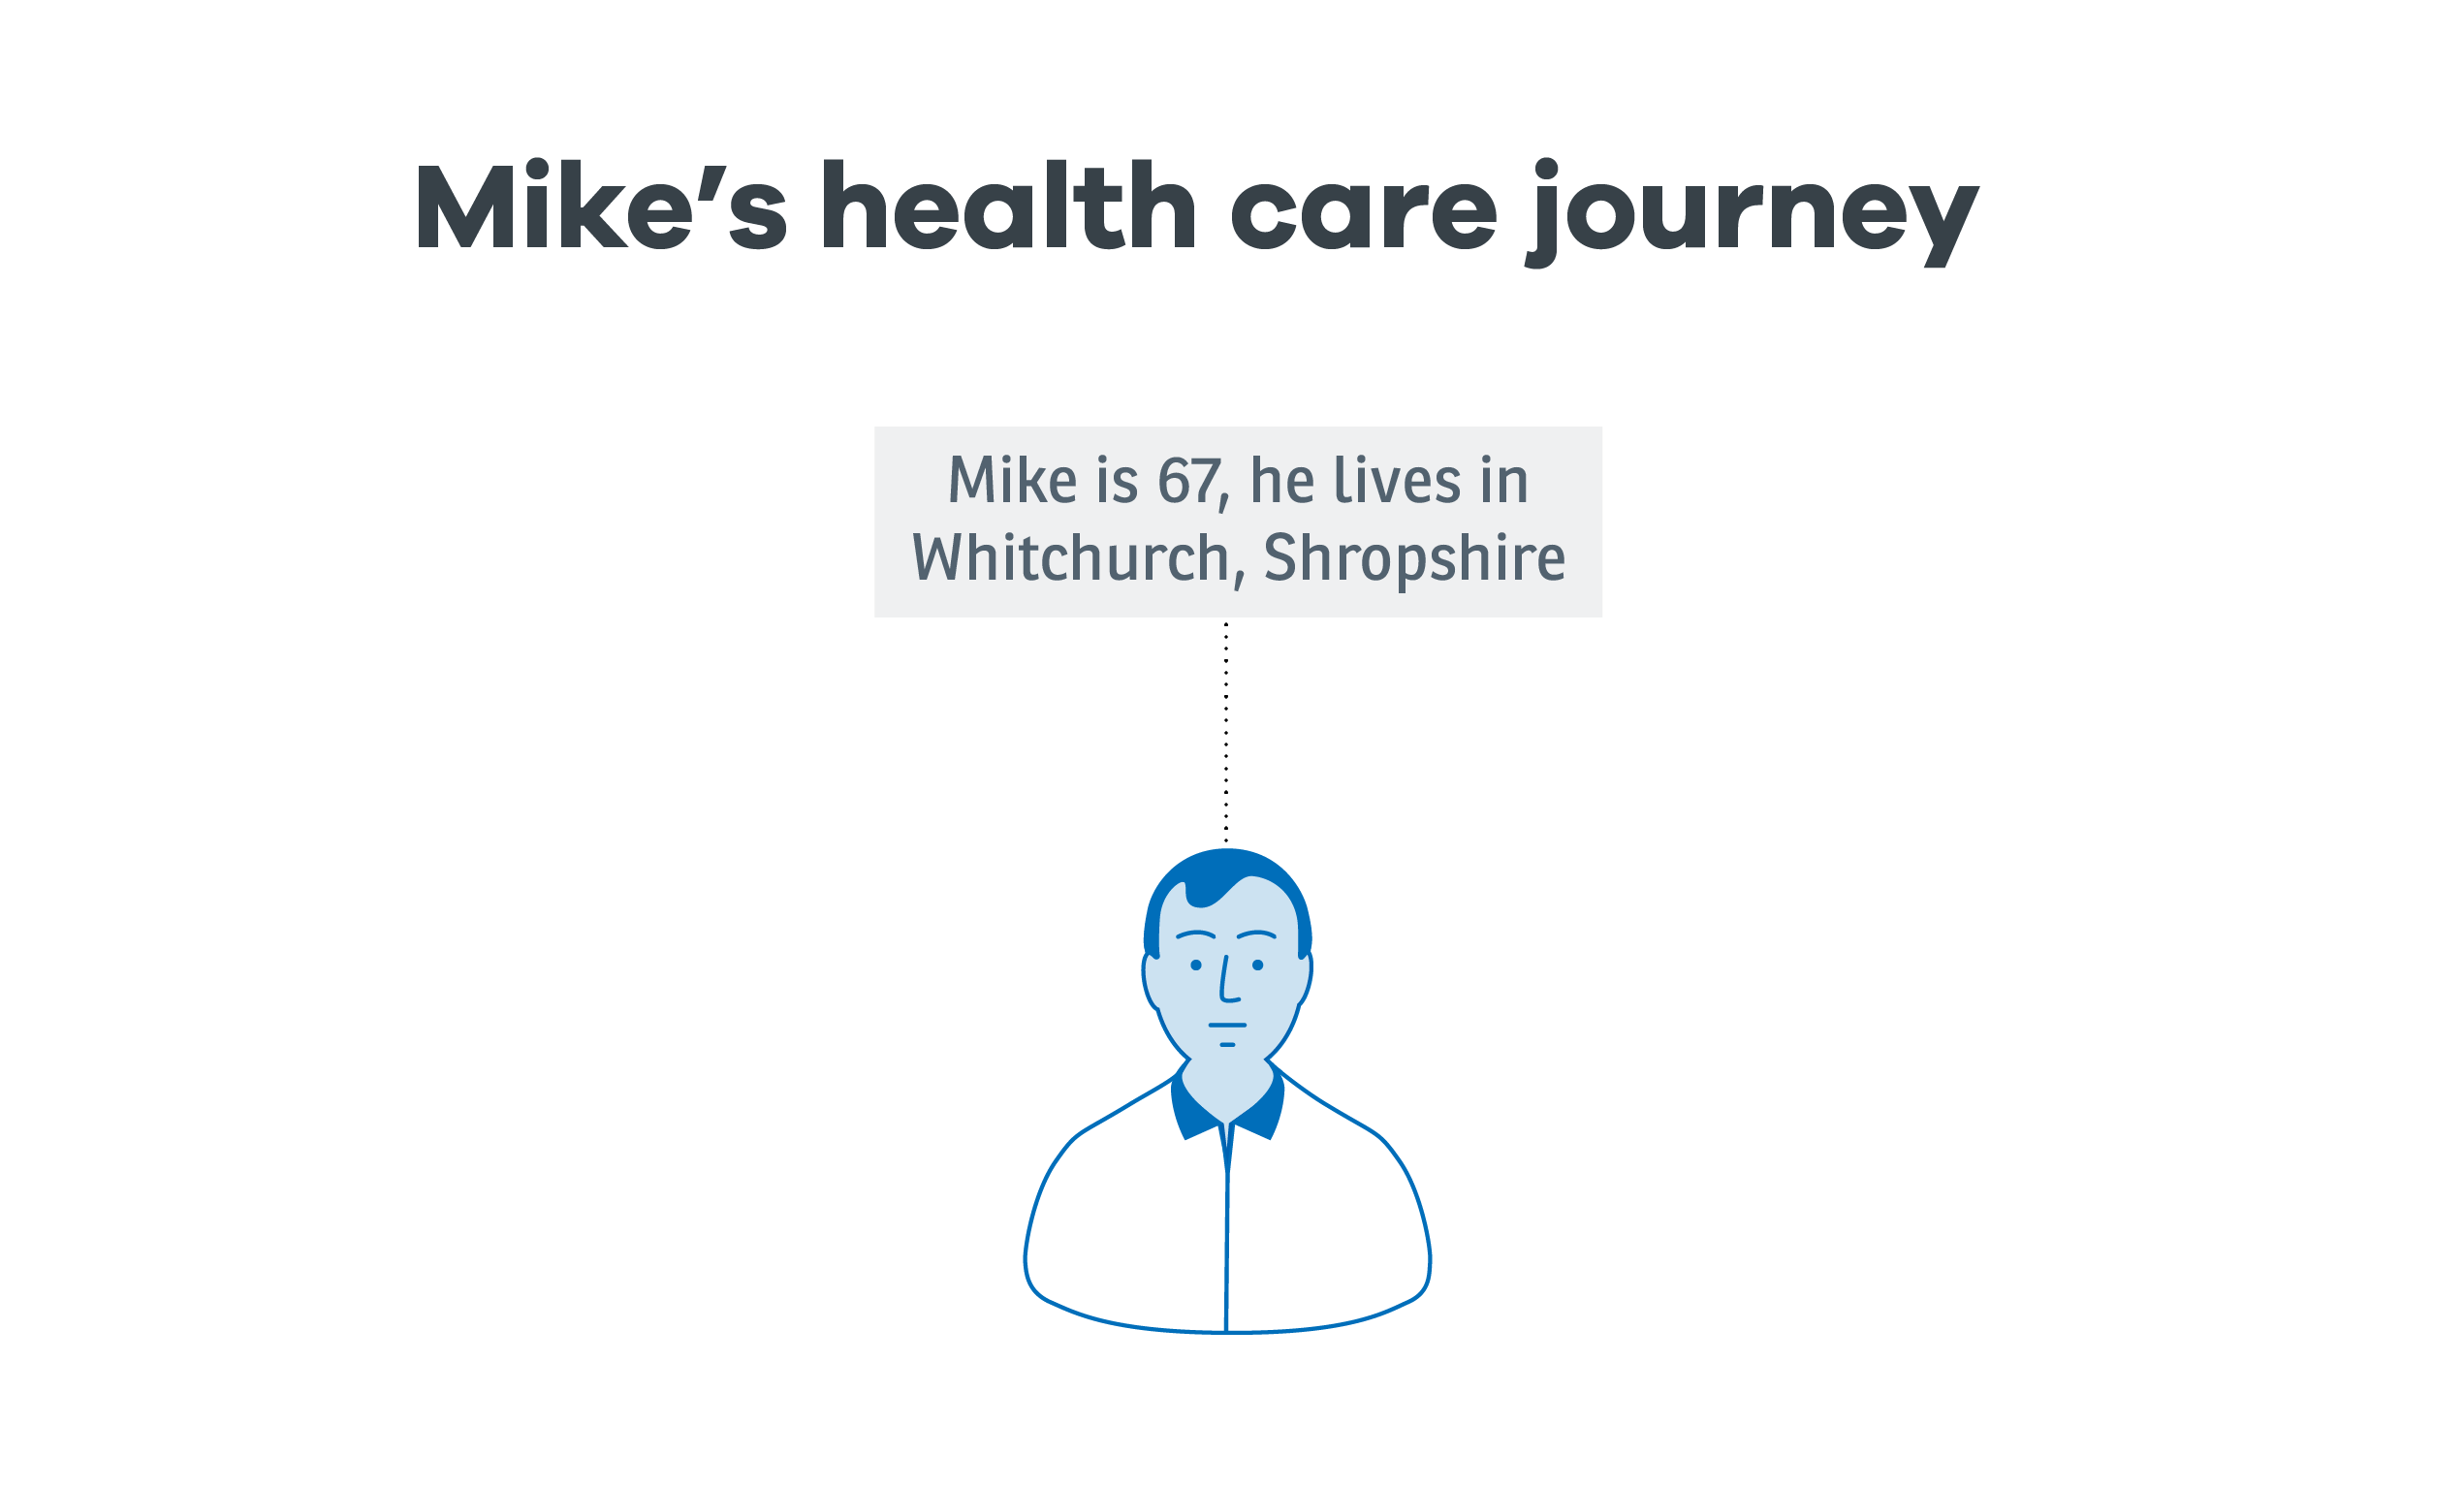 Experience map introduction: A diagram introducing Mike